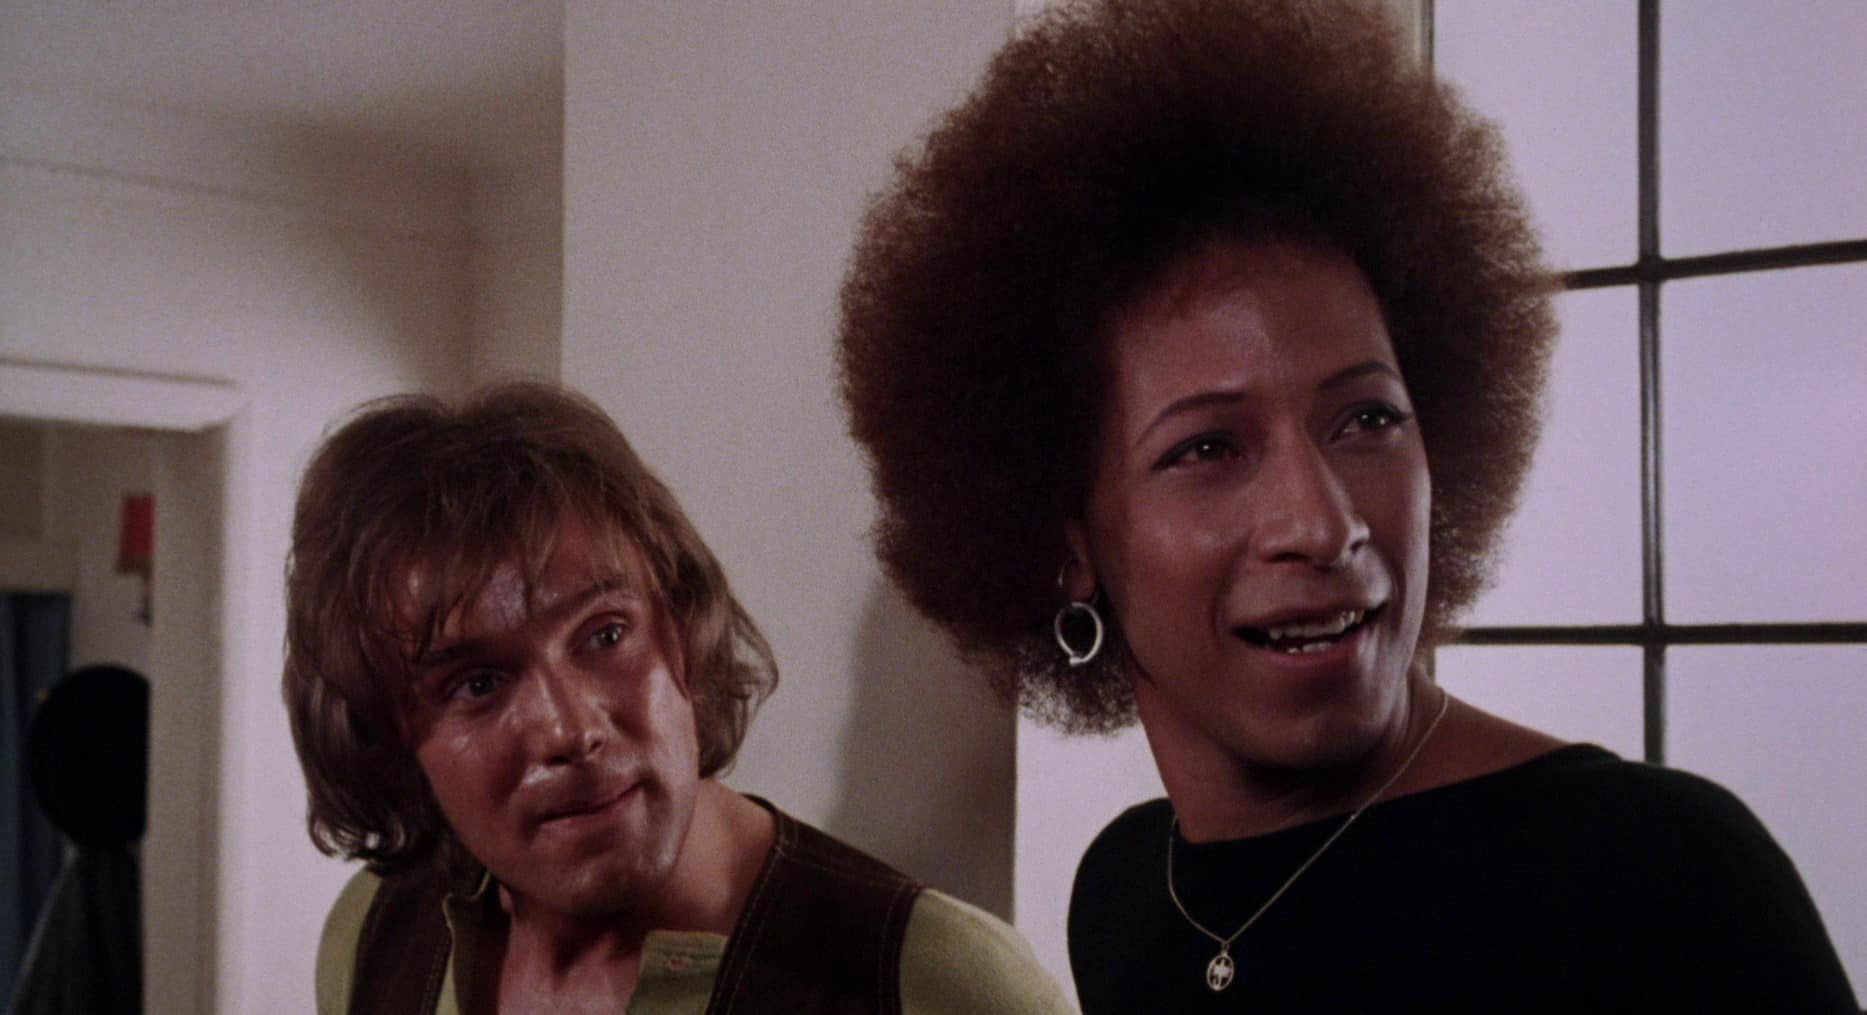 Clive Francis and Peter Straker in this image from Virgin Films